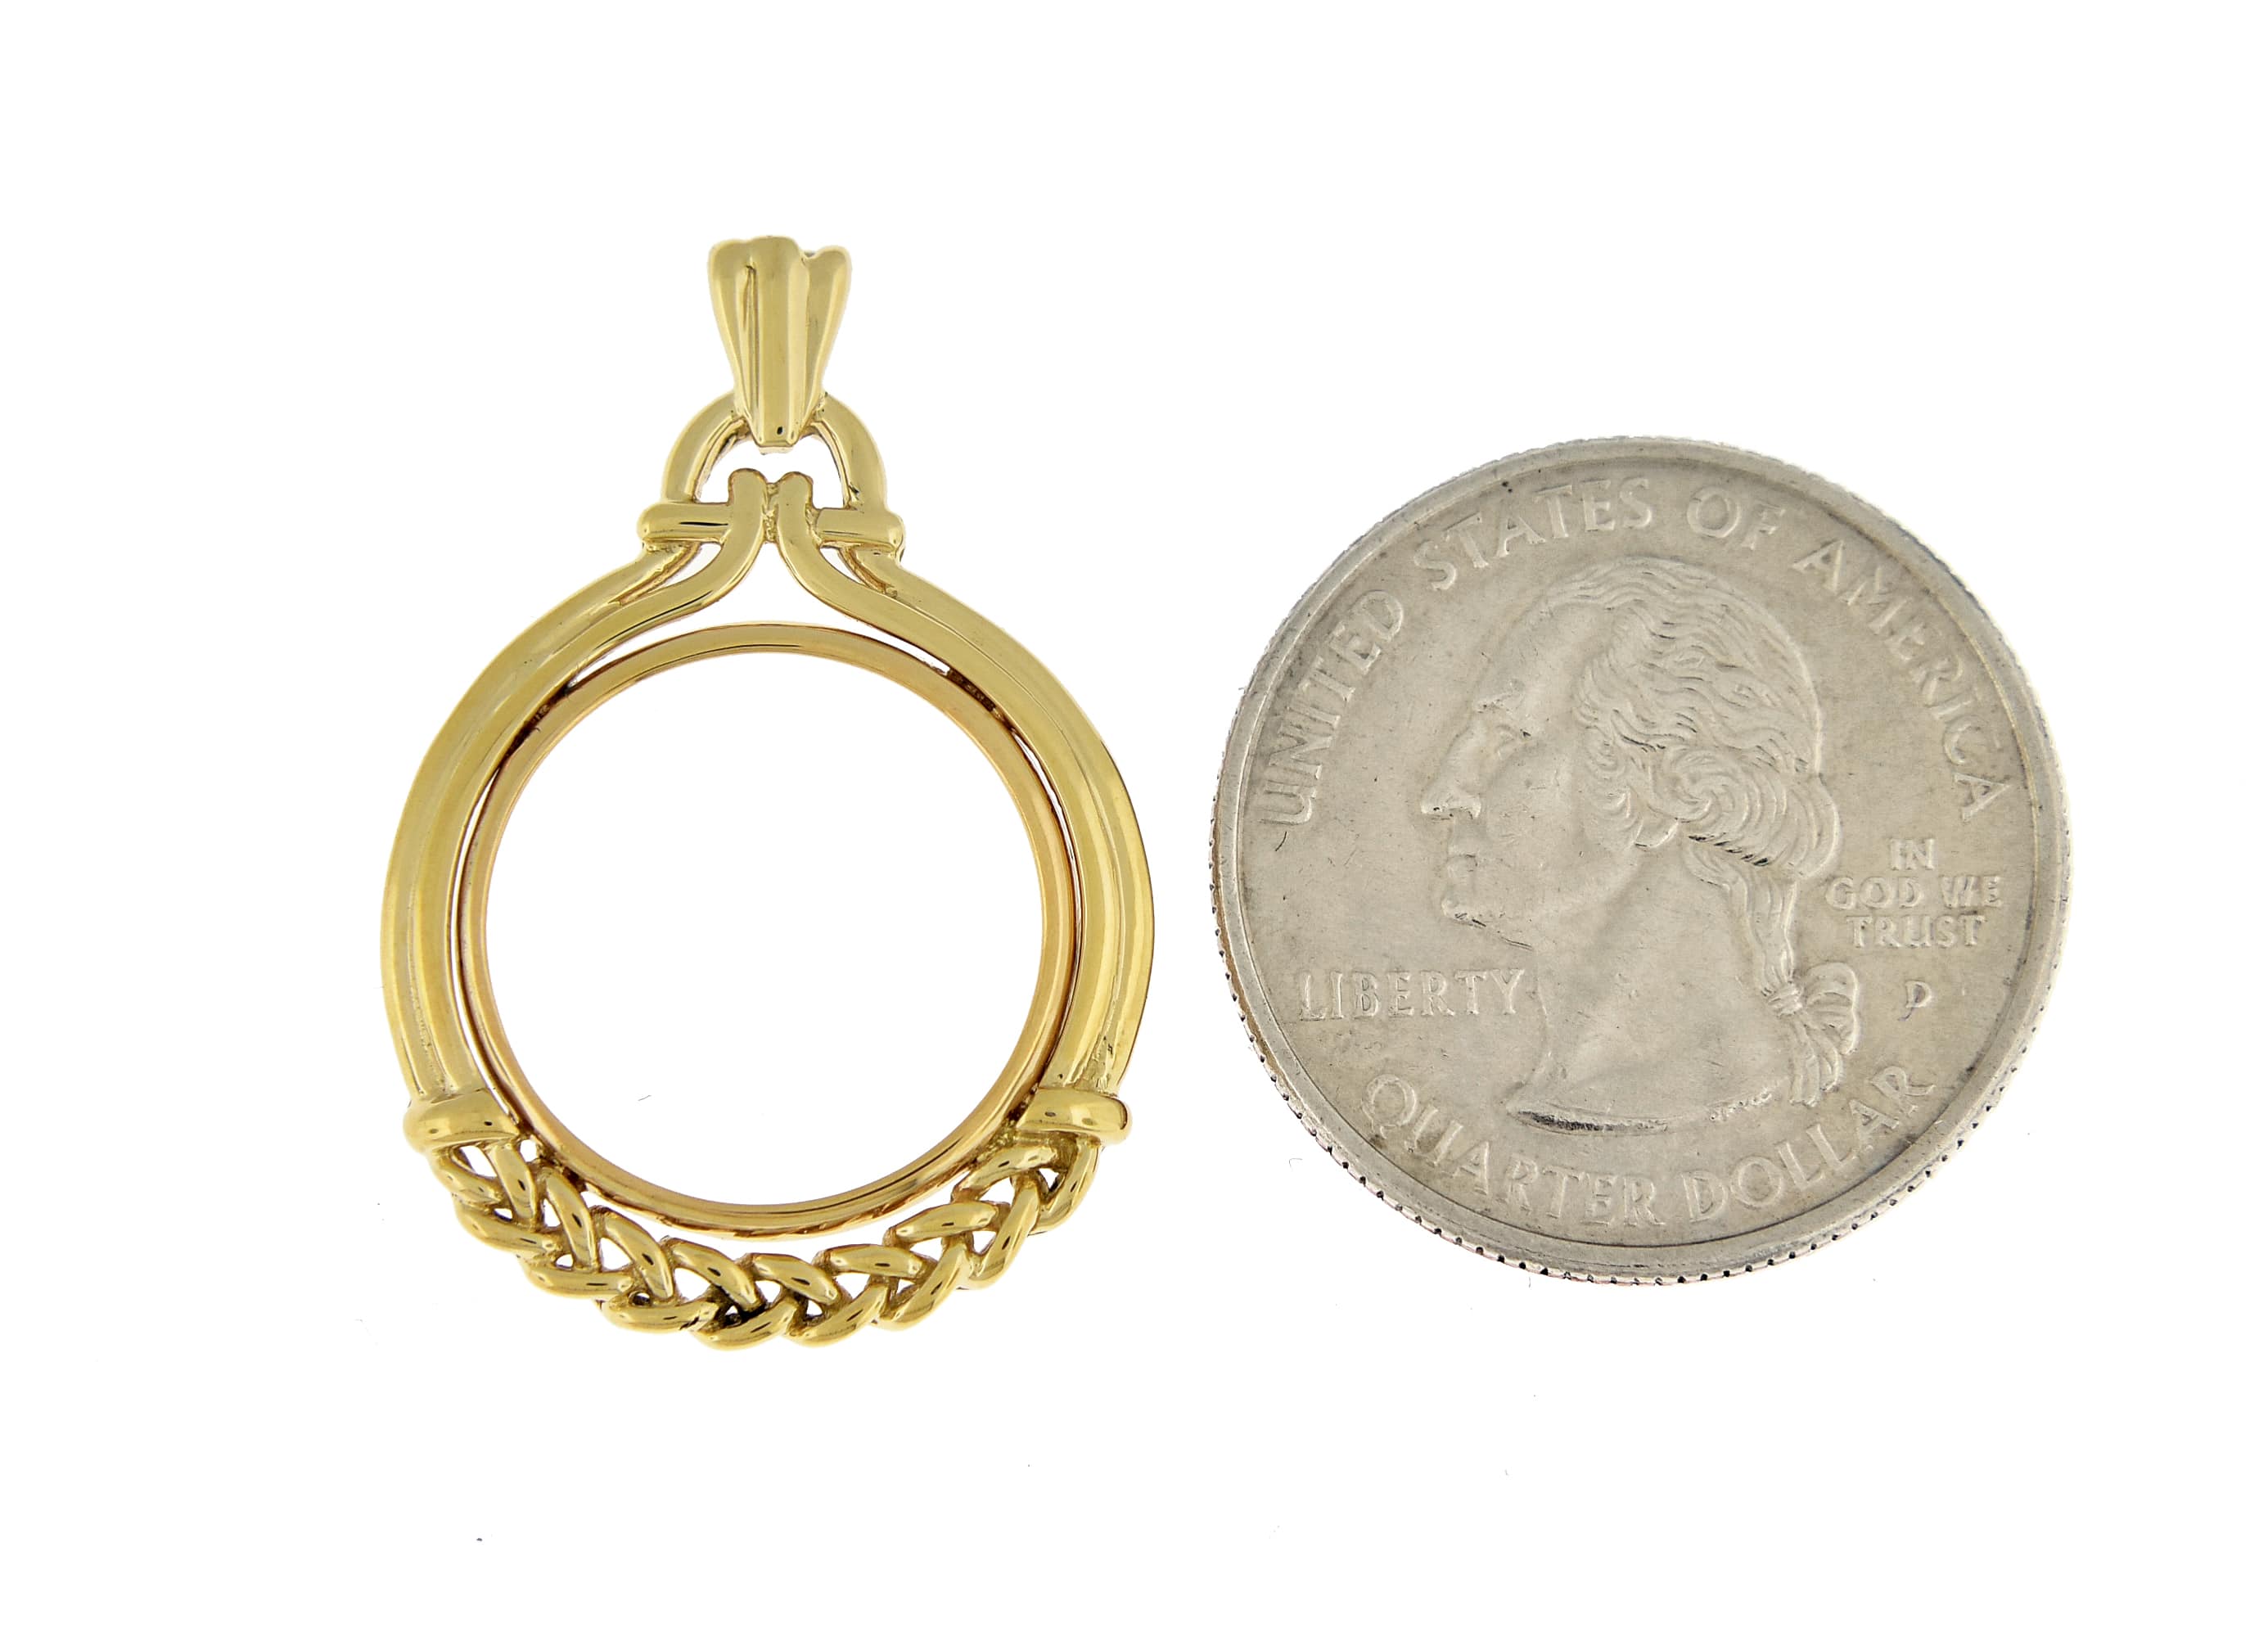 14K Yellow Gold for 16.5mm Coins or 1/10 oz American Eagle or Krugerrand Coin Holder Prong Bezel Pendant Charm